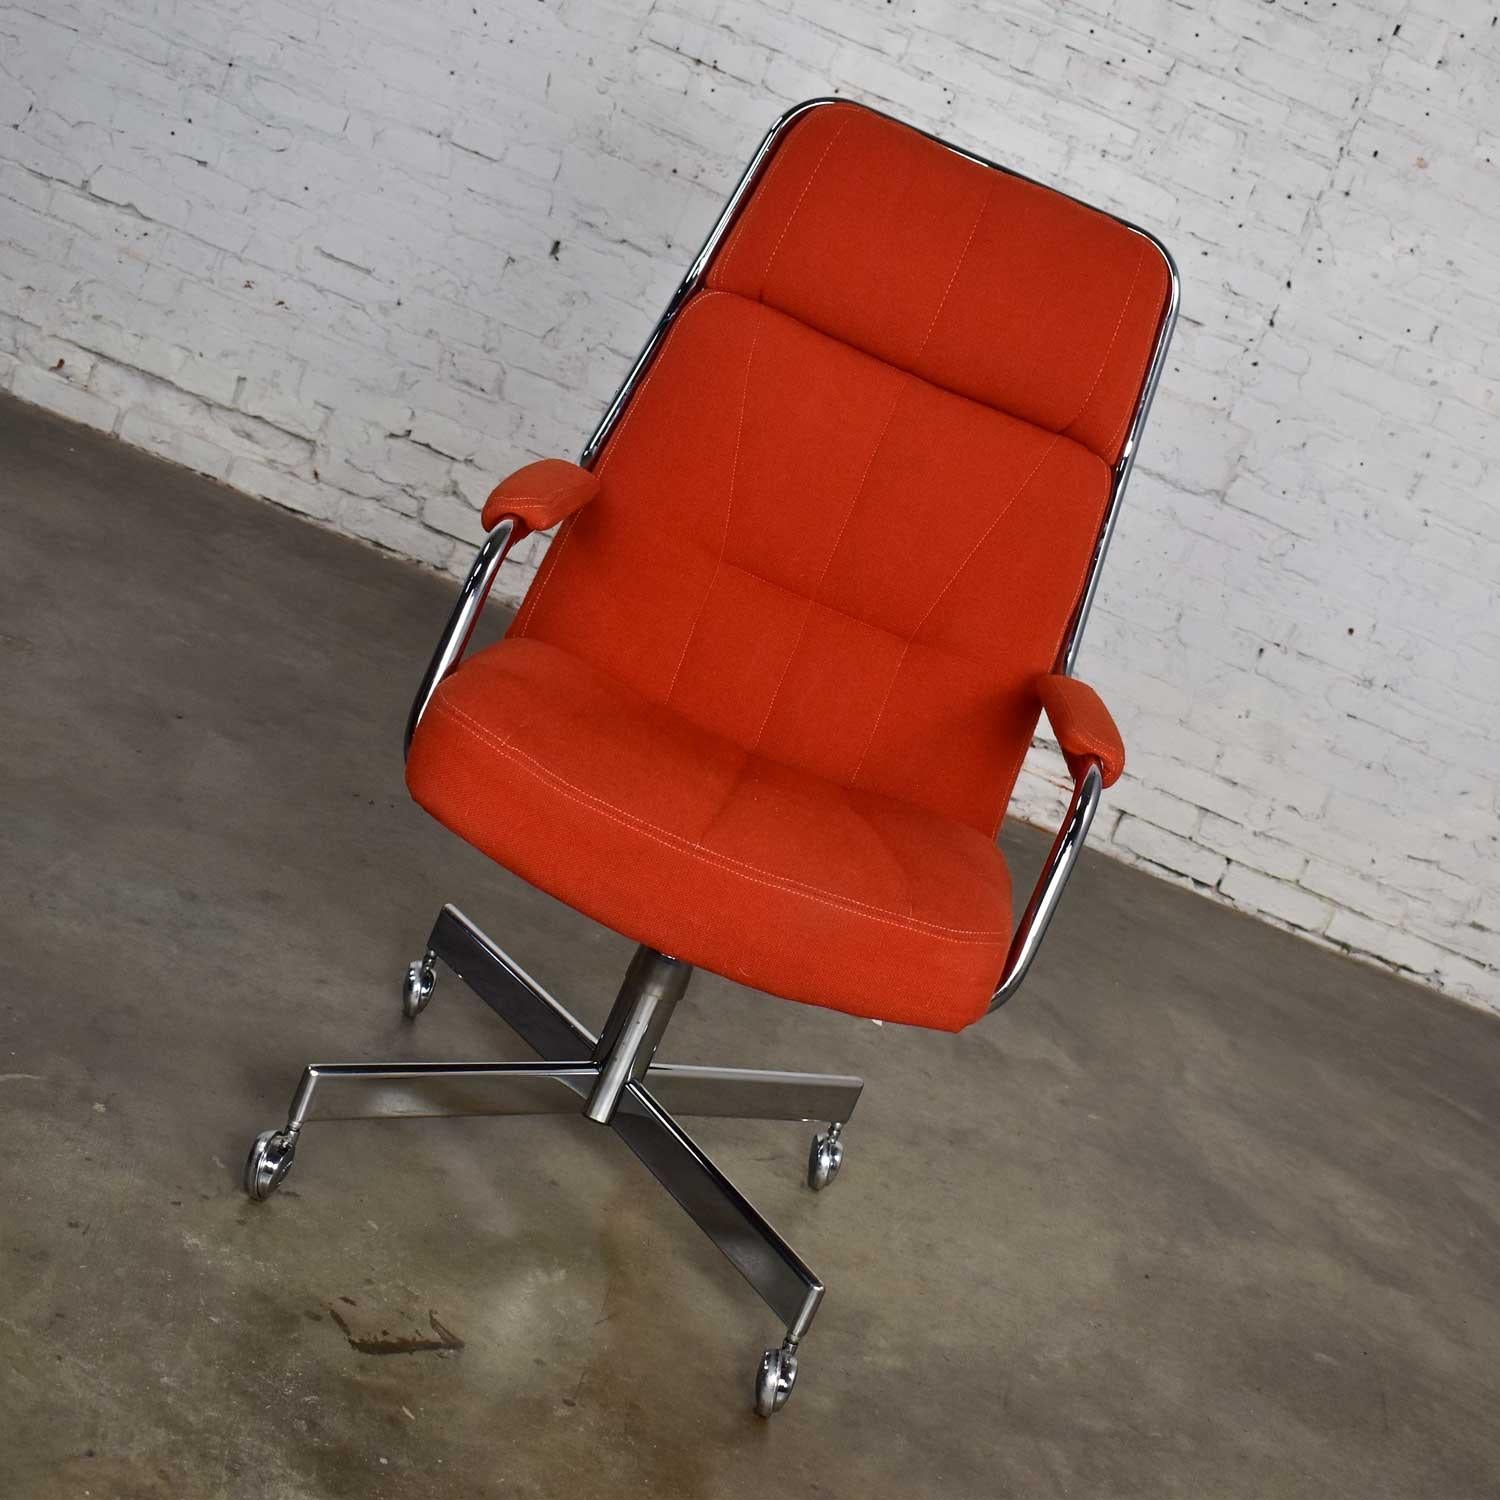 Stunning modern style Chromcraft high back office chair comprised of orange hopsack fabric on a chrome four prong X base with casters, adjustable height, and adjustable lean. Gorgeous vintage condition. Wearing its original fabric and has only